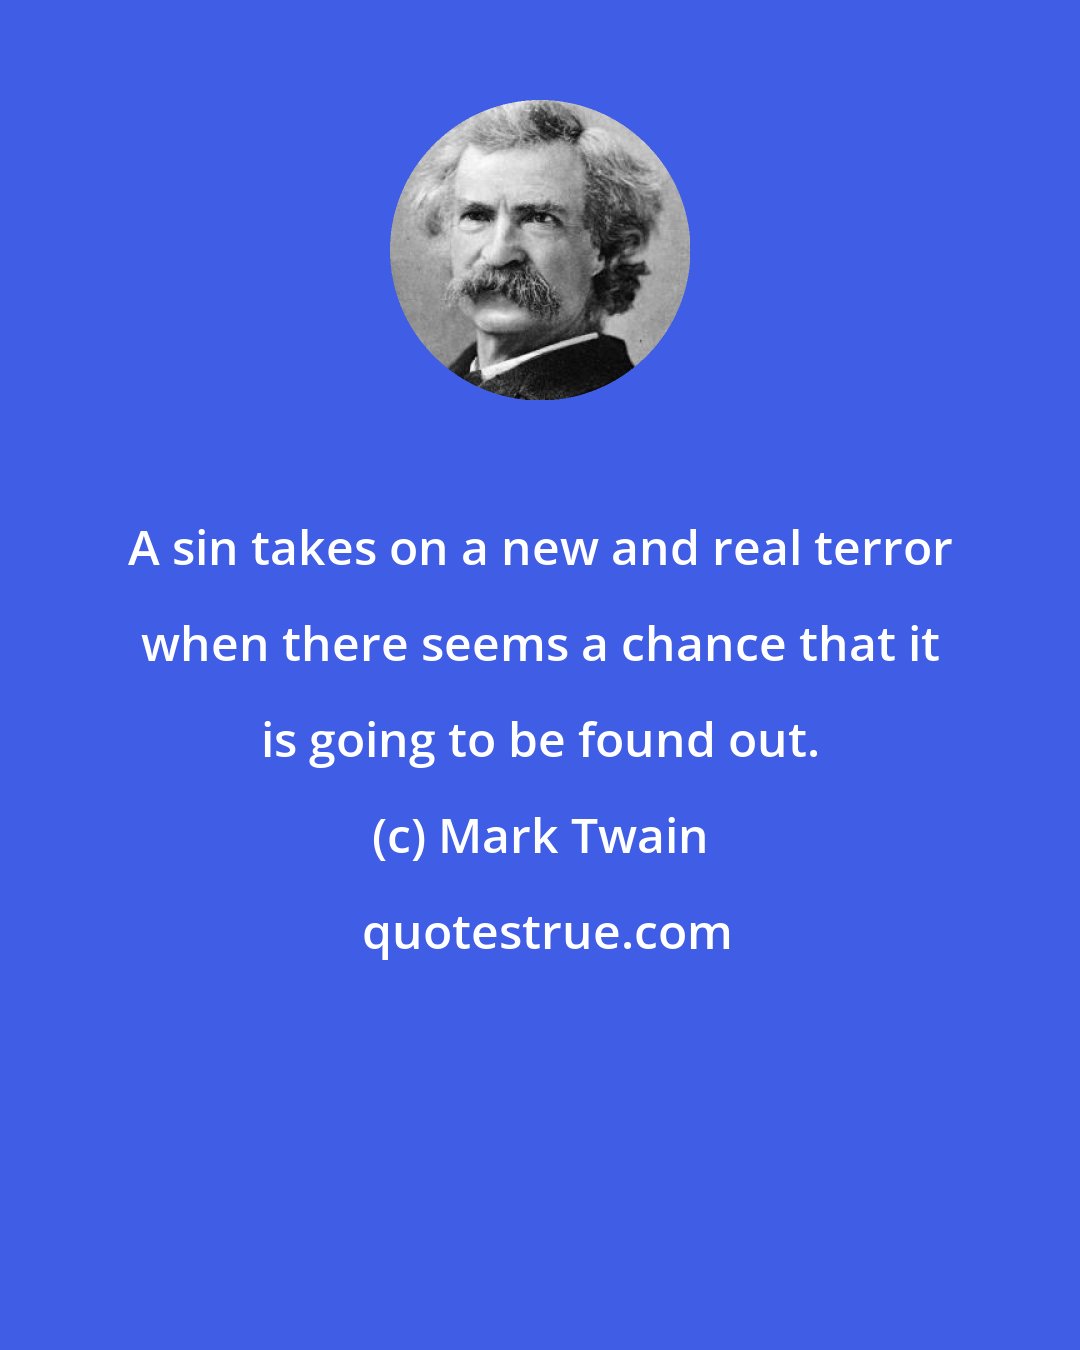 Mark Twain: A sin takes on a new and real terror when there seems a chance that it is going to be found out.